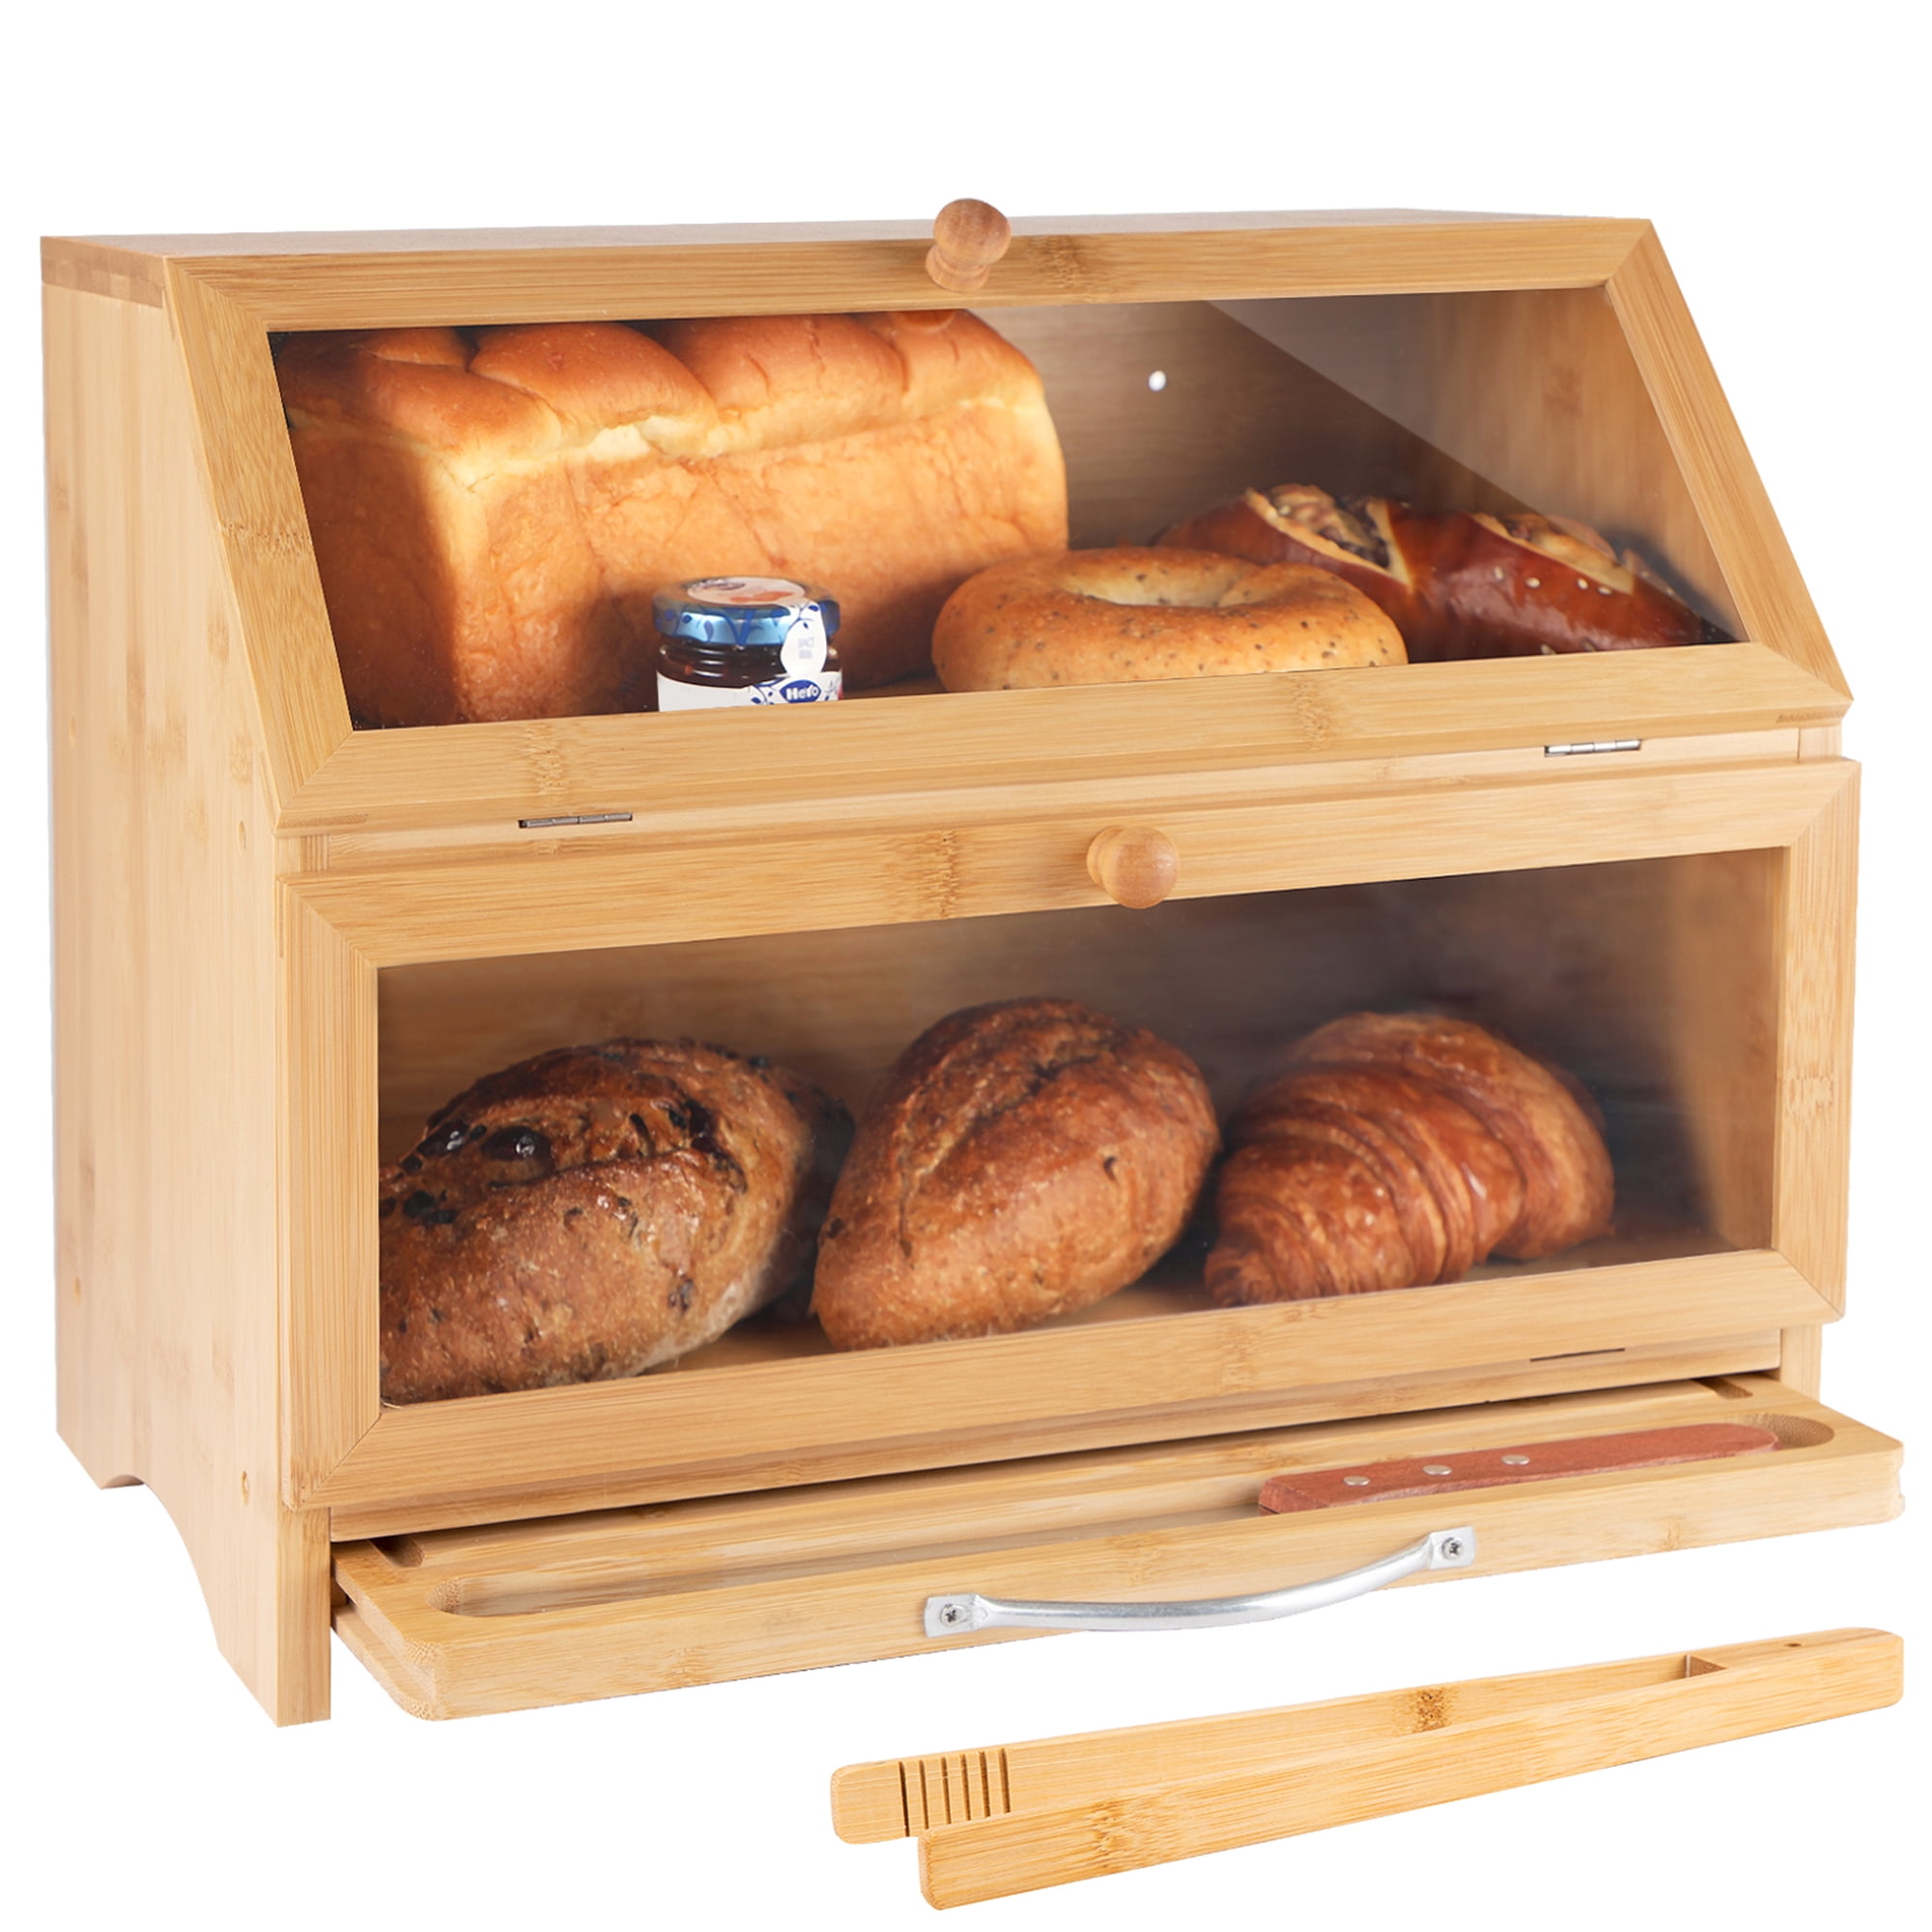 Double Layer Corner Bread Box - Bamboo Large Capacity Breadbox - Bread Box  for Kitchen Countertop with Adjustable Separator, Easy to Assemble - Modern